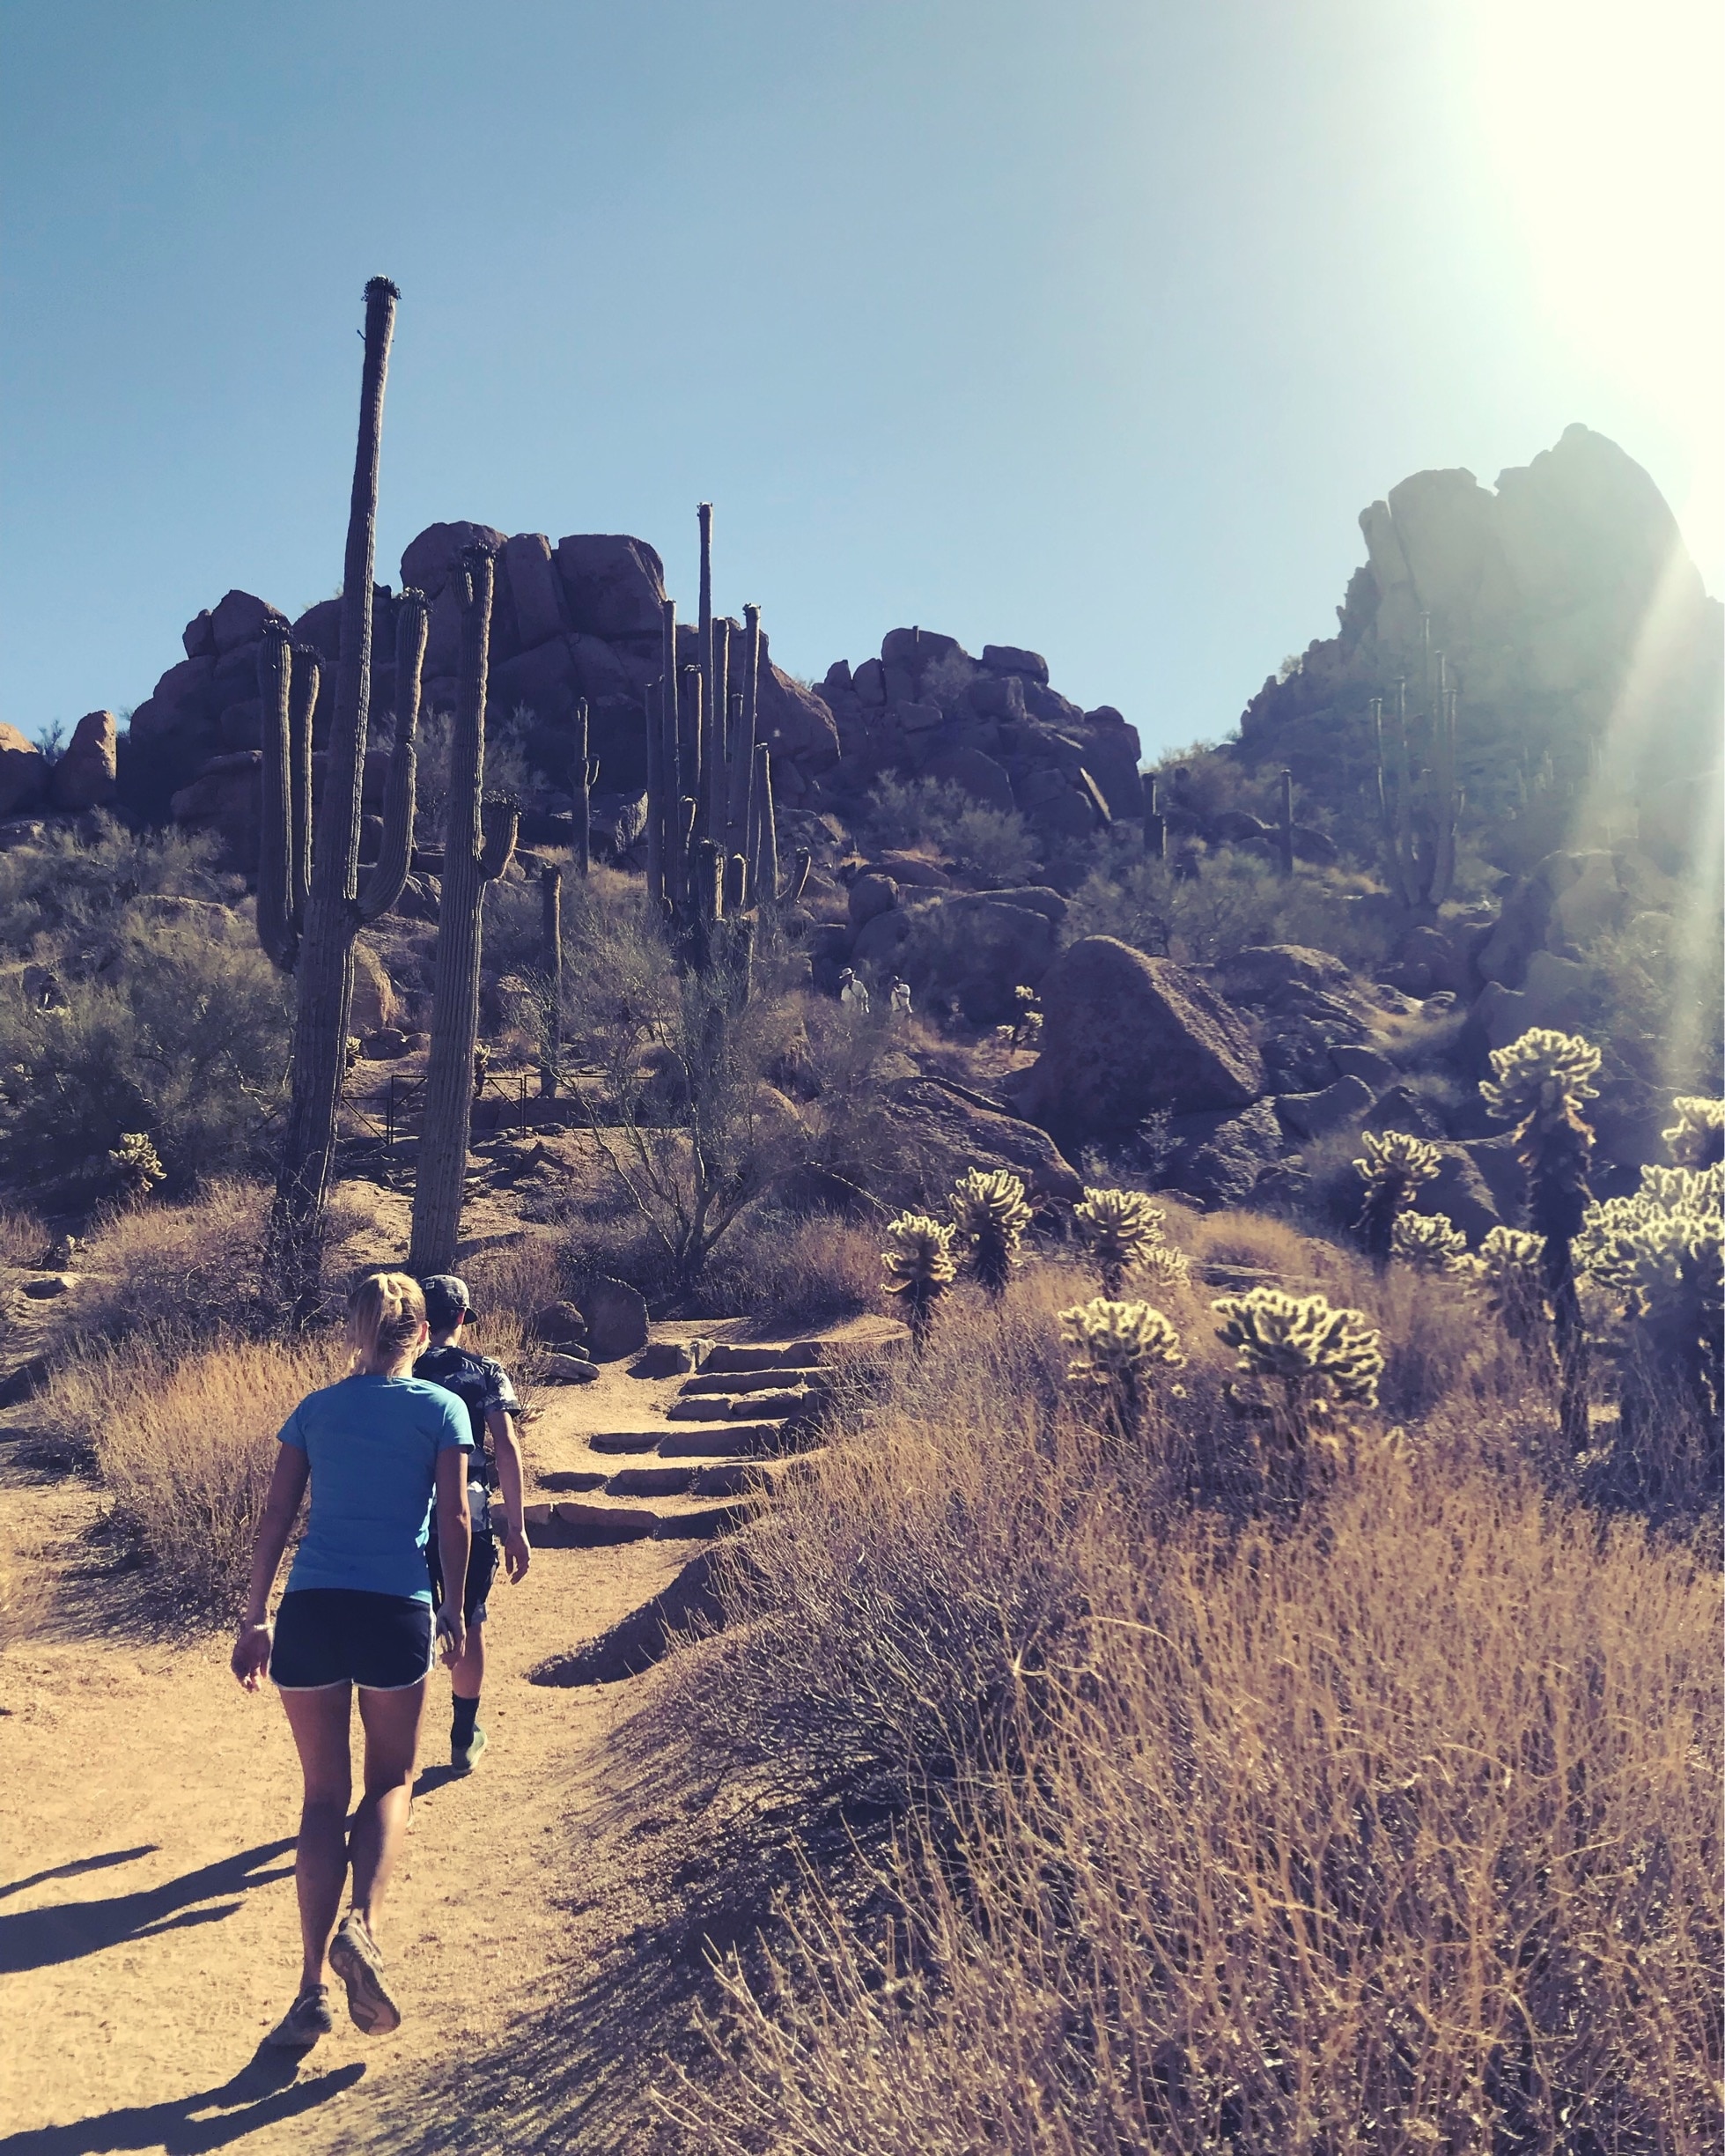 It’s a dry heat, but it’s still hot.  Make sure to get started early enough in the day and drink plenty of water if you plan on hiking in the desert.  #desert